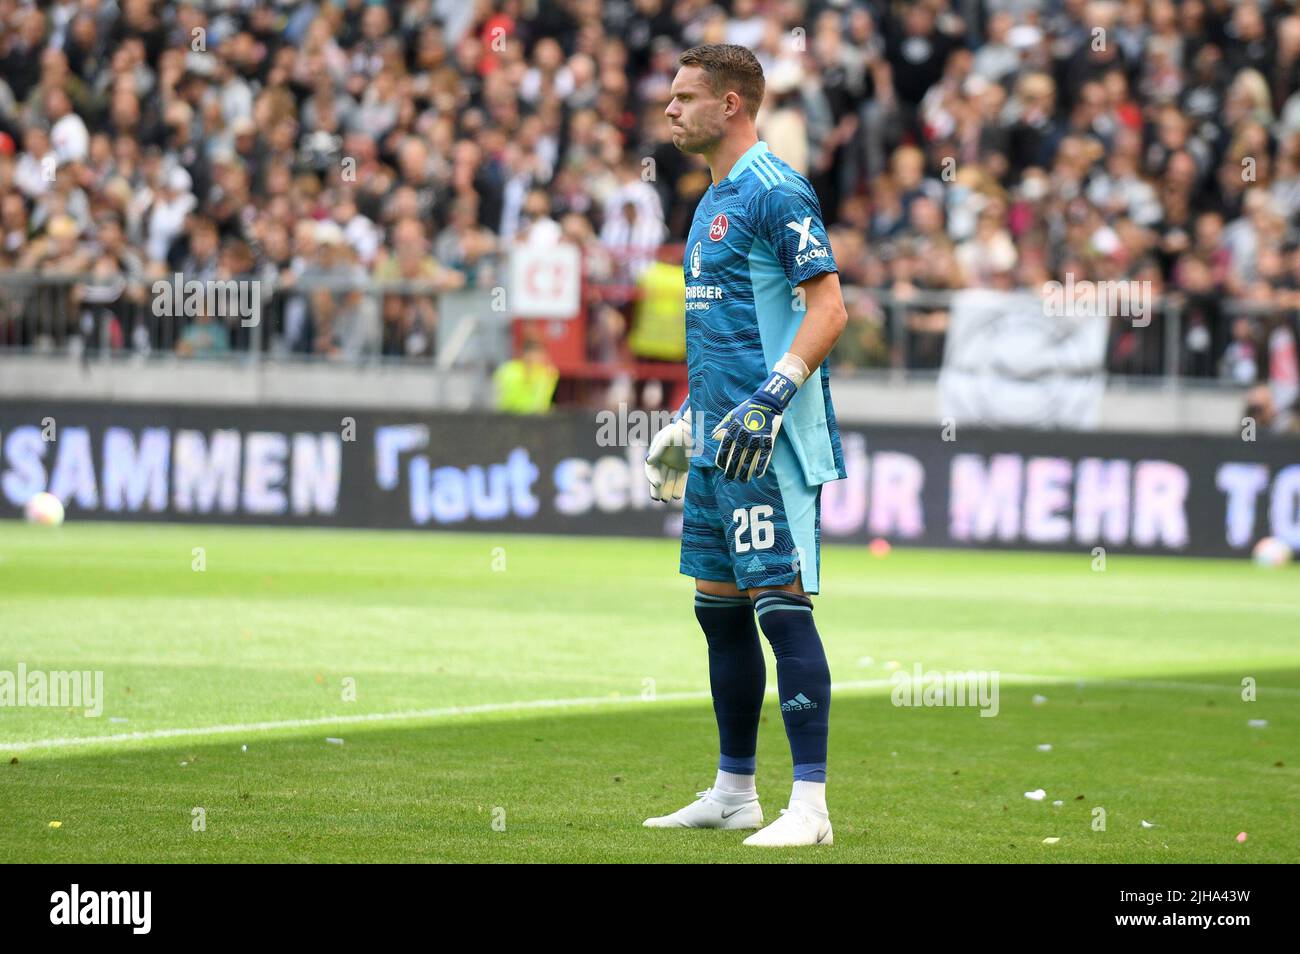 Hamburg, Germany. 16th July, 2022. Soccer: 2nd Bundesliga, Matchday 1, Hamburg, Millerntor-Stadion, FC St. Pauli - 1. FC Nürnberg, FCN goalkeeper Christian Mathenia annoyed after the early 0:1. Credit: Michael Schwartz/dpa - IMPORTANT NOTE: In accordance with the requirements of the DFL Deutsche Fußball Liga and the DFB Deutscher Fußball-Bund, it is prohibited to use or have used photographs taken in the stadium and/or of the match in the form of sequence pictures and/or video-like photo series./dpa/Alamy Live News Stock Photo